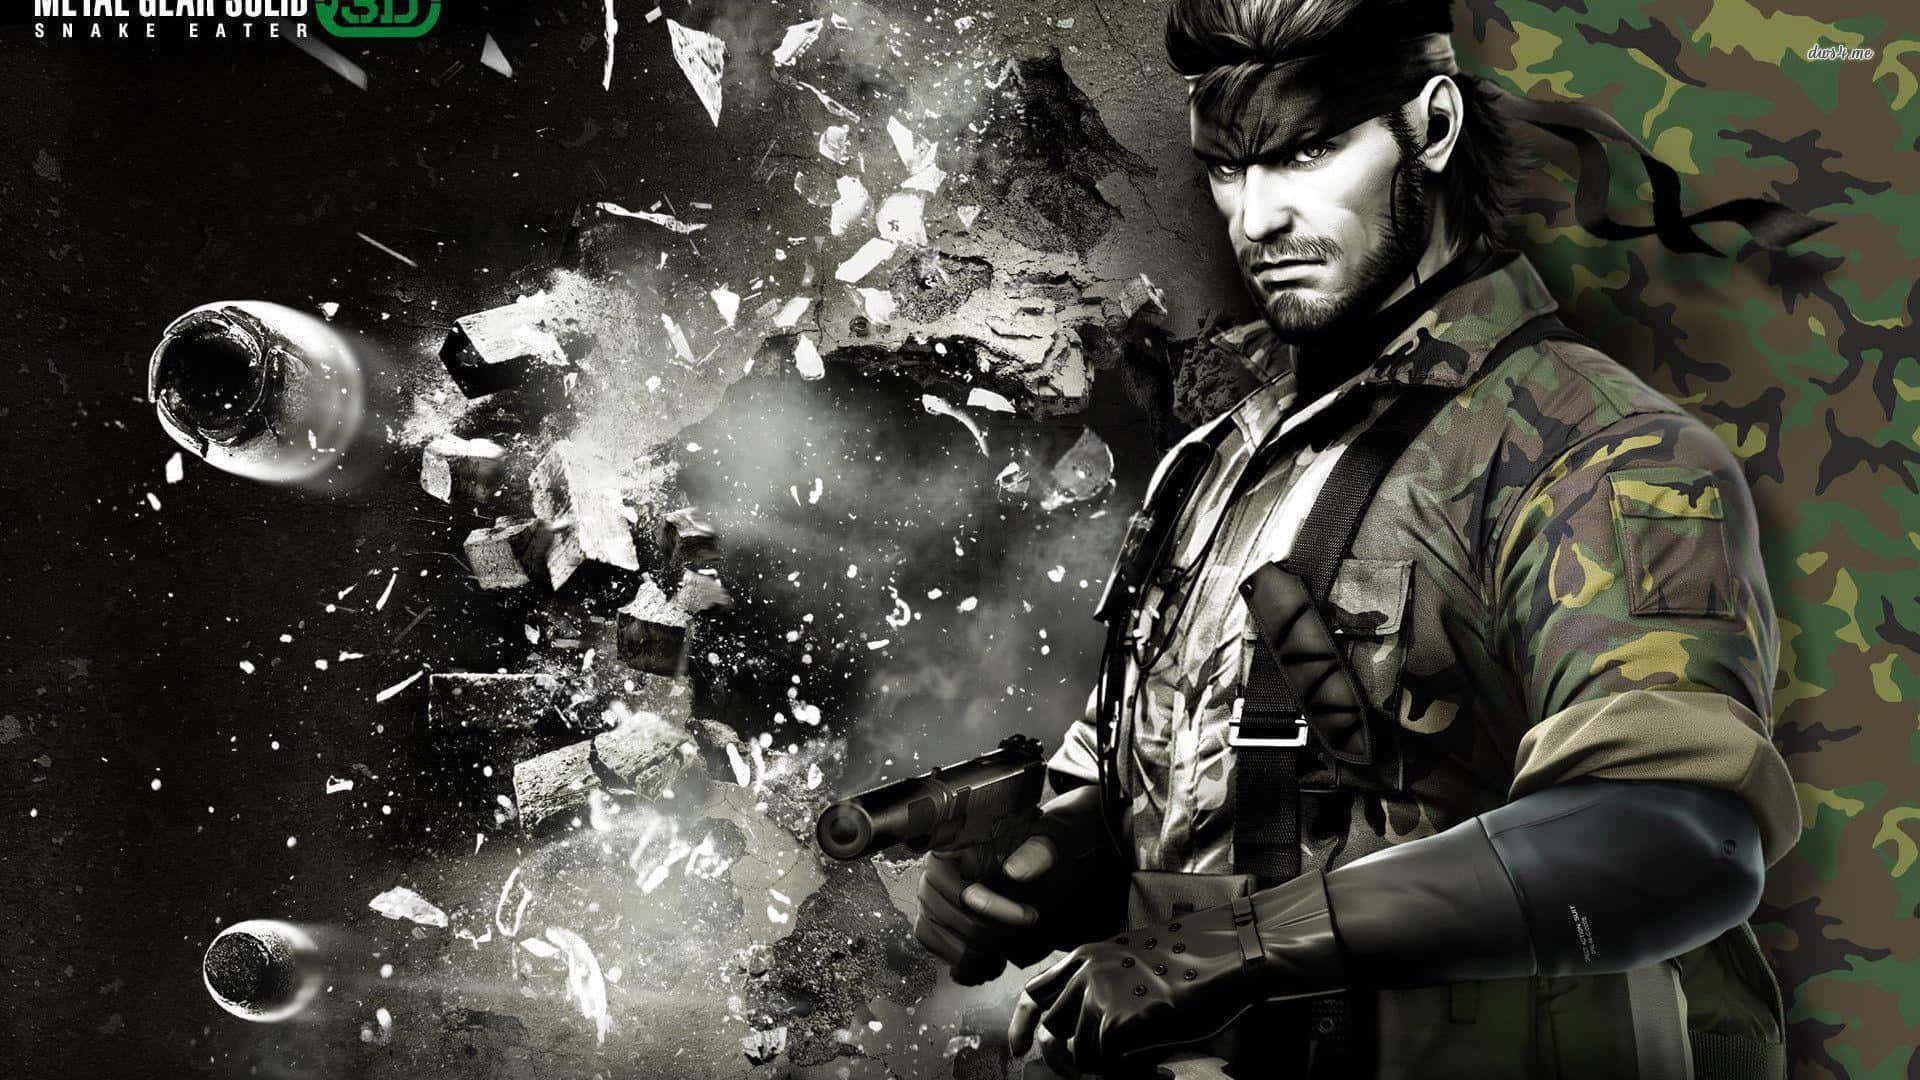 Solid Snake Is Ready To Take On His Mission Background